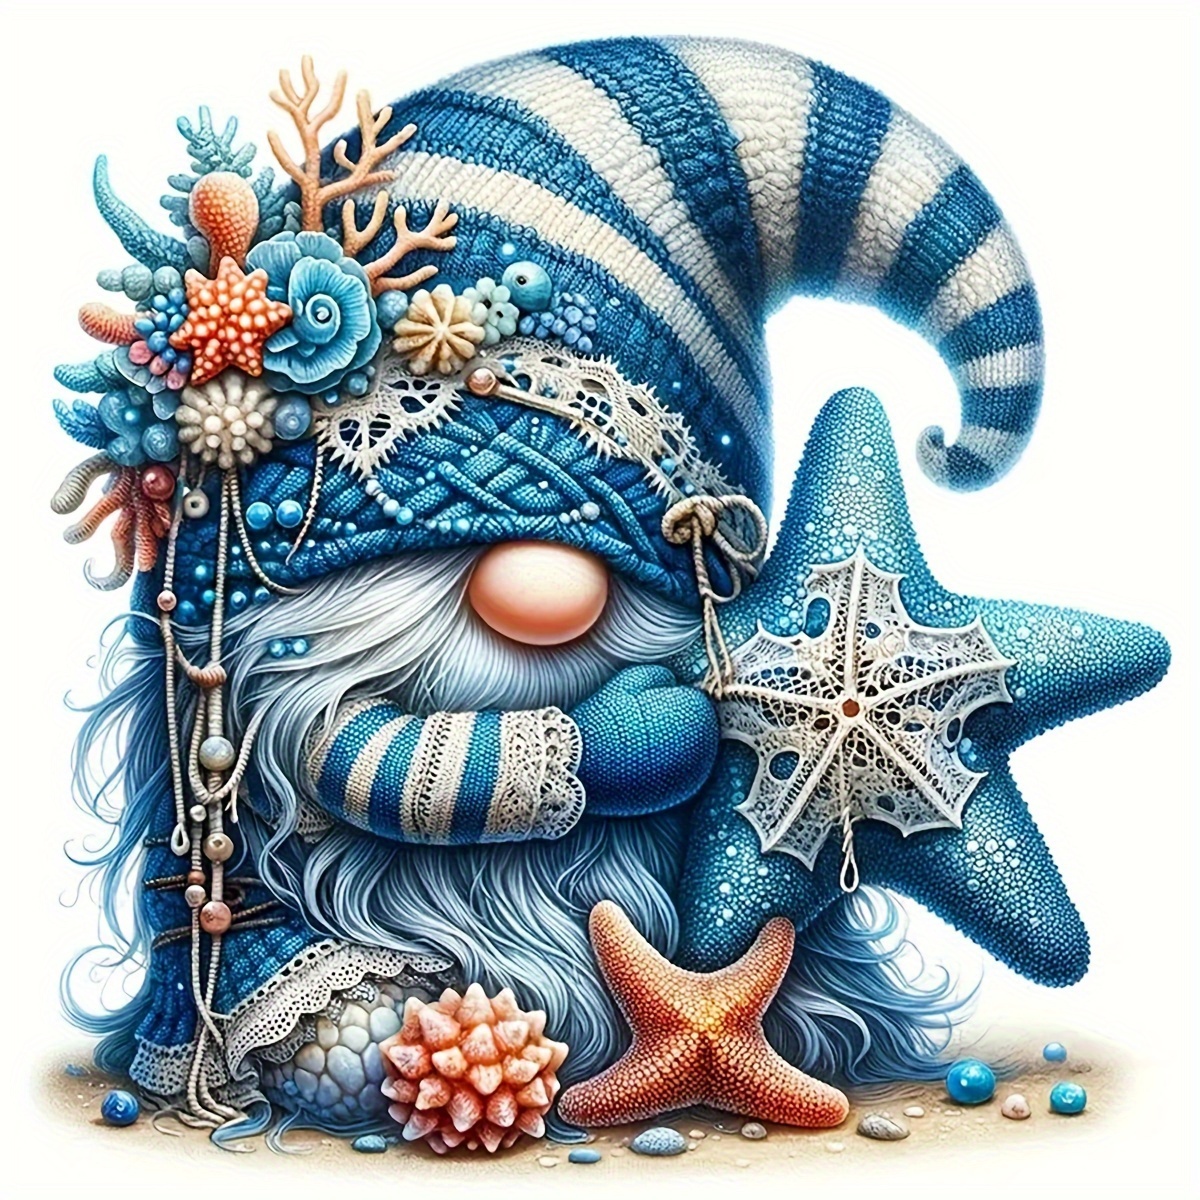 

5d Diy Diamond Painting Kit - Round Acrylic (pmma) Embroidery Art Craft - Starfish Gnome Design Diamond Art 30cm X 30cm - Home Wall Decor & Unique Gift Without Frame